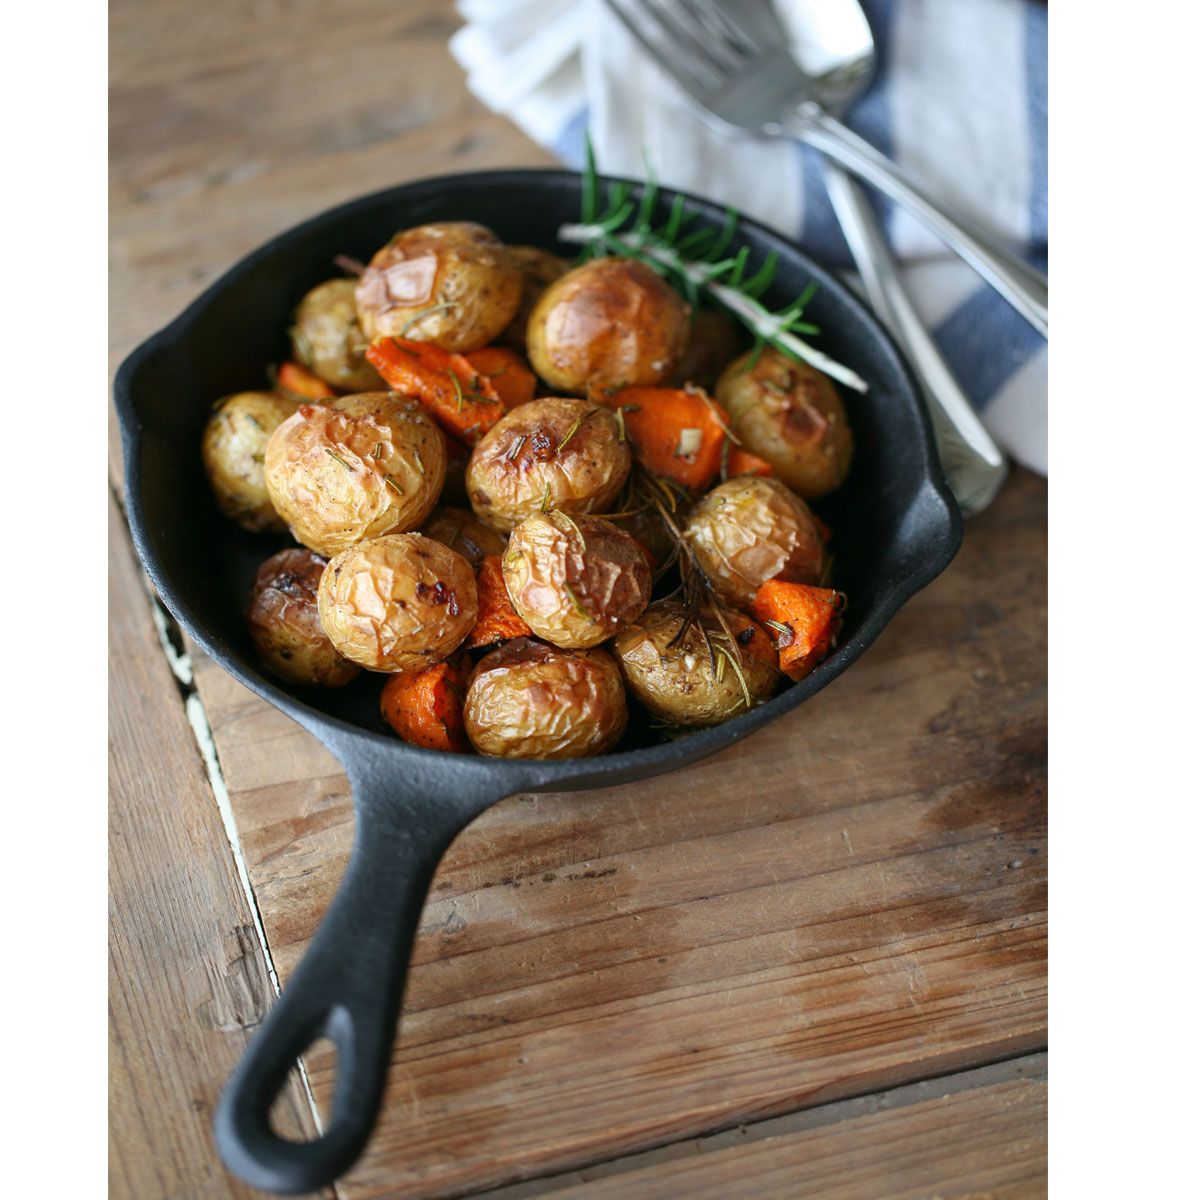 roasted jersey royals